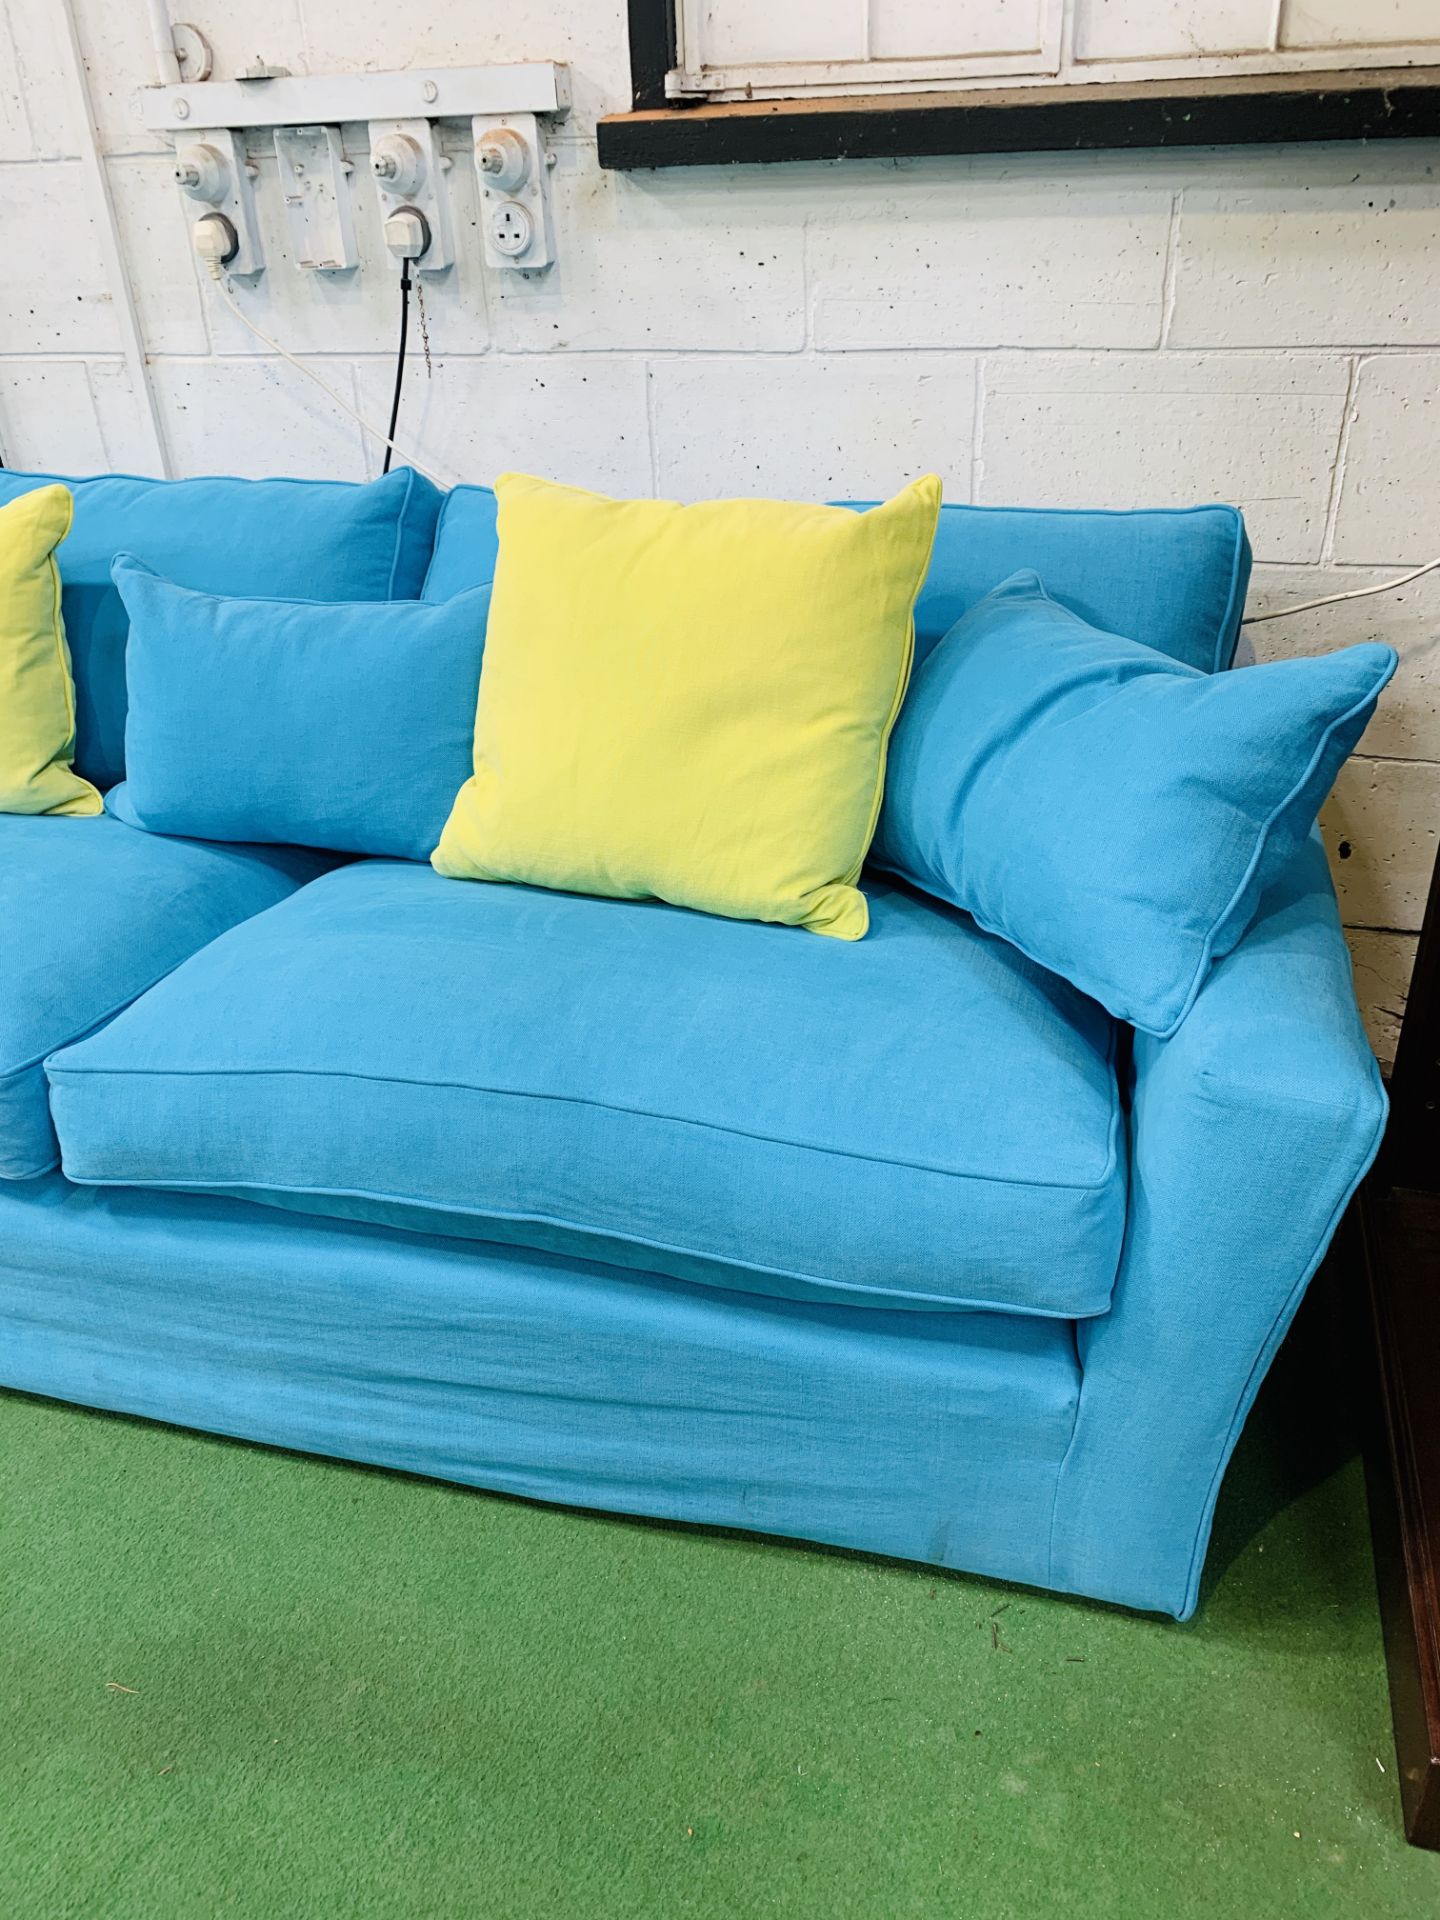 Three seat sofa by "Sofa Workshop" upholstered in turquoise cotton loose covers, with matching cushi - Image 3 of 4